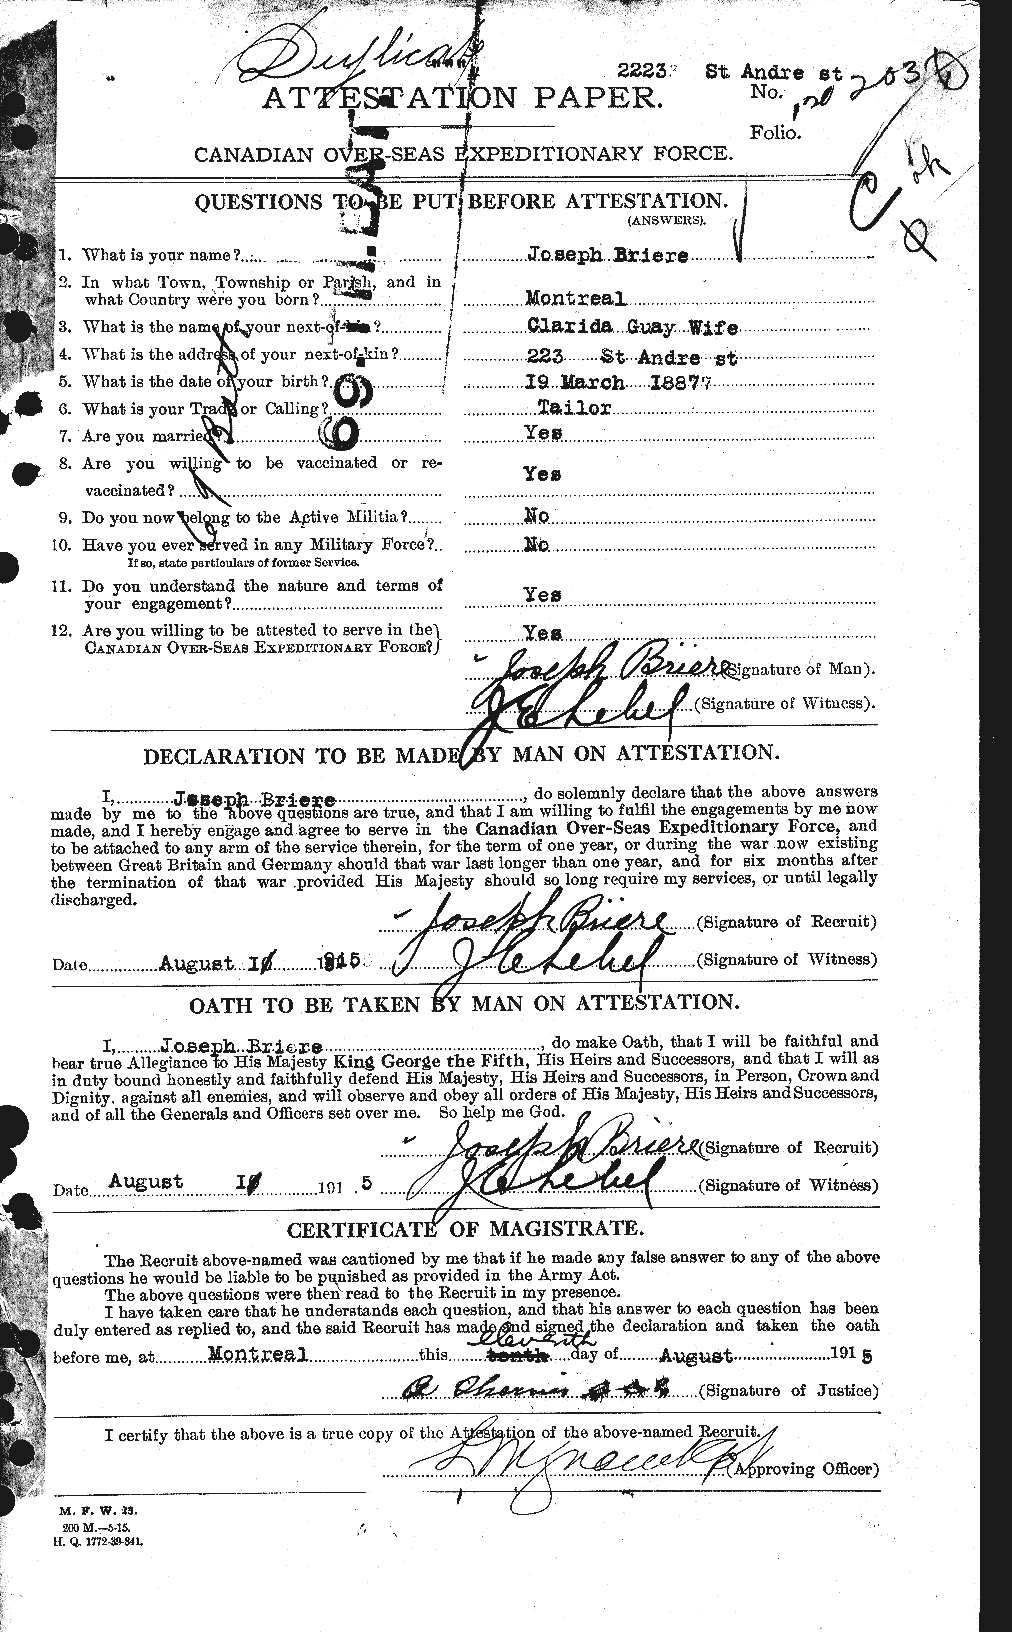 Personnel Records of the First World War - CEF 259979a